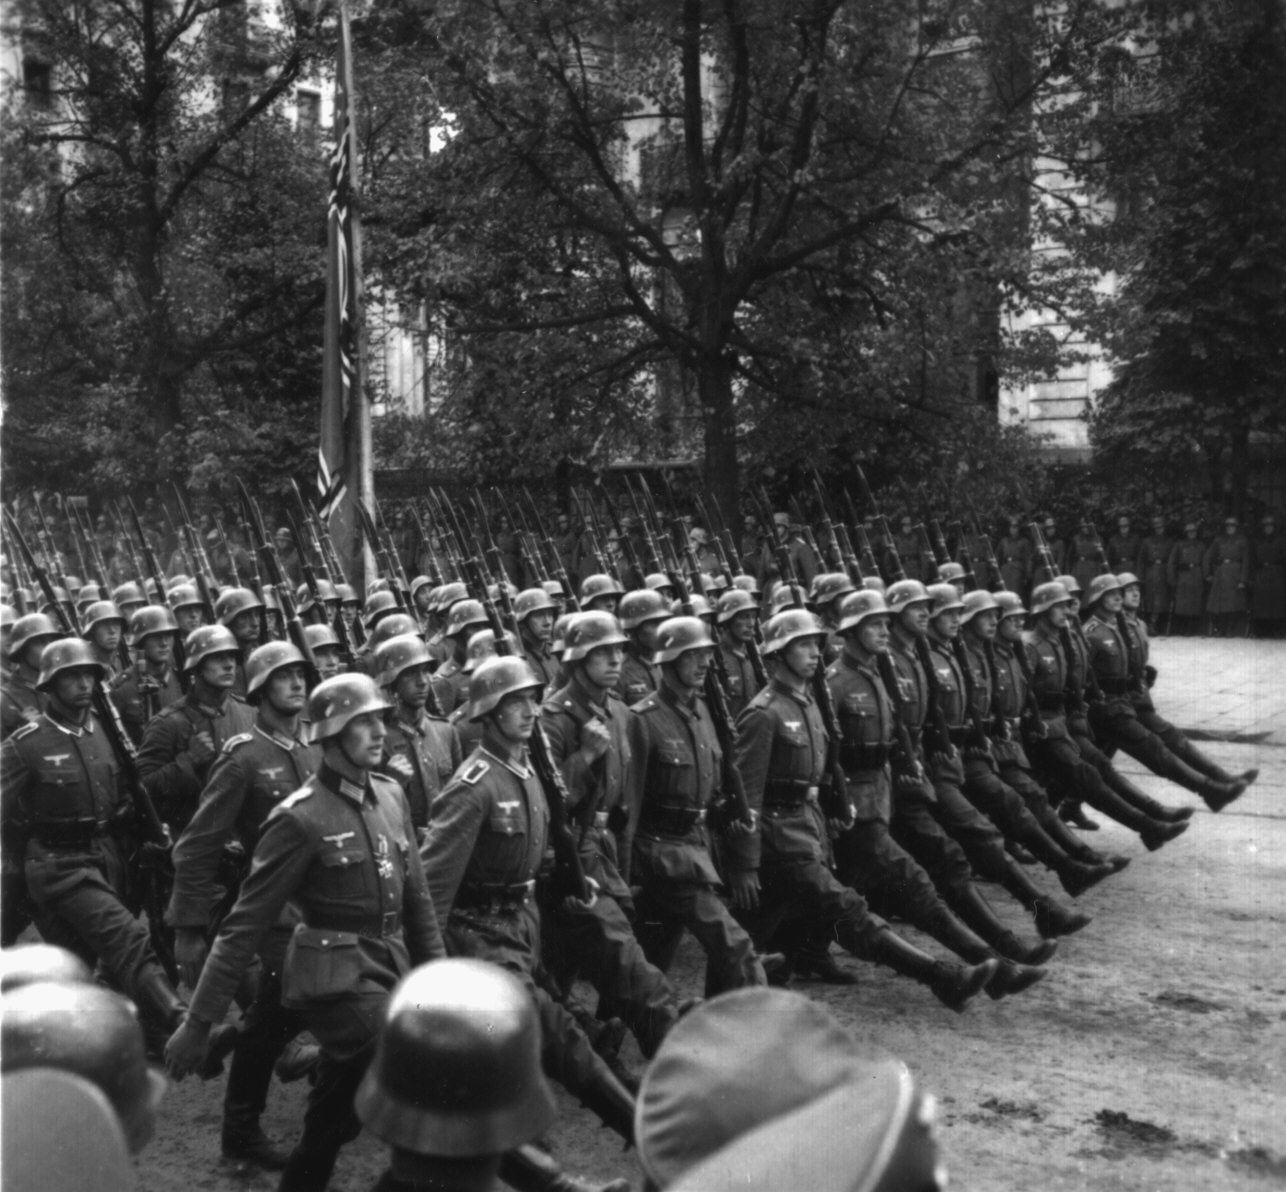 Goose stepping German soldiers parade down a Berlin street. According to some scholars, these troops were set in motion following a secret meeting at the Reich Chancellery and the drafting of the German blueprint for war, the Hossbach Memorandum.